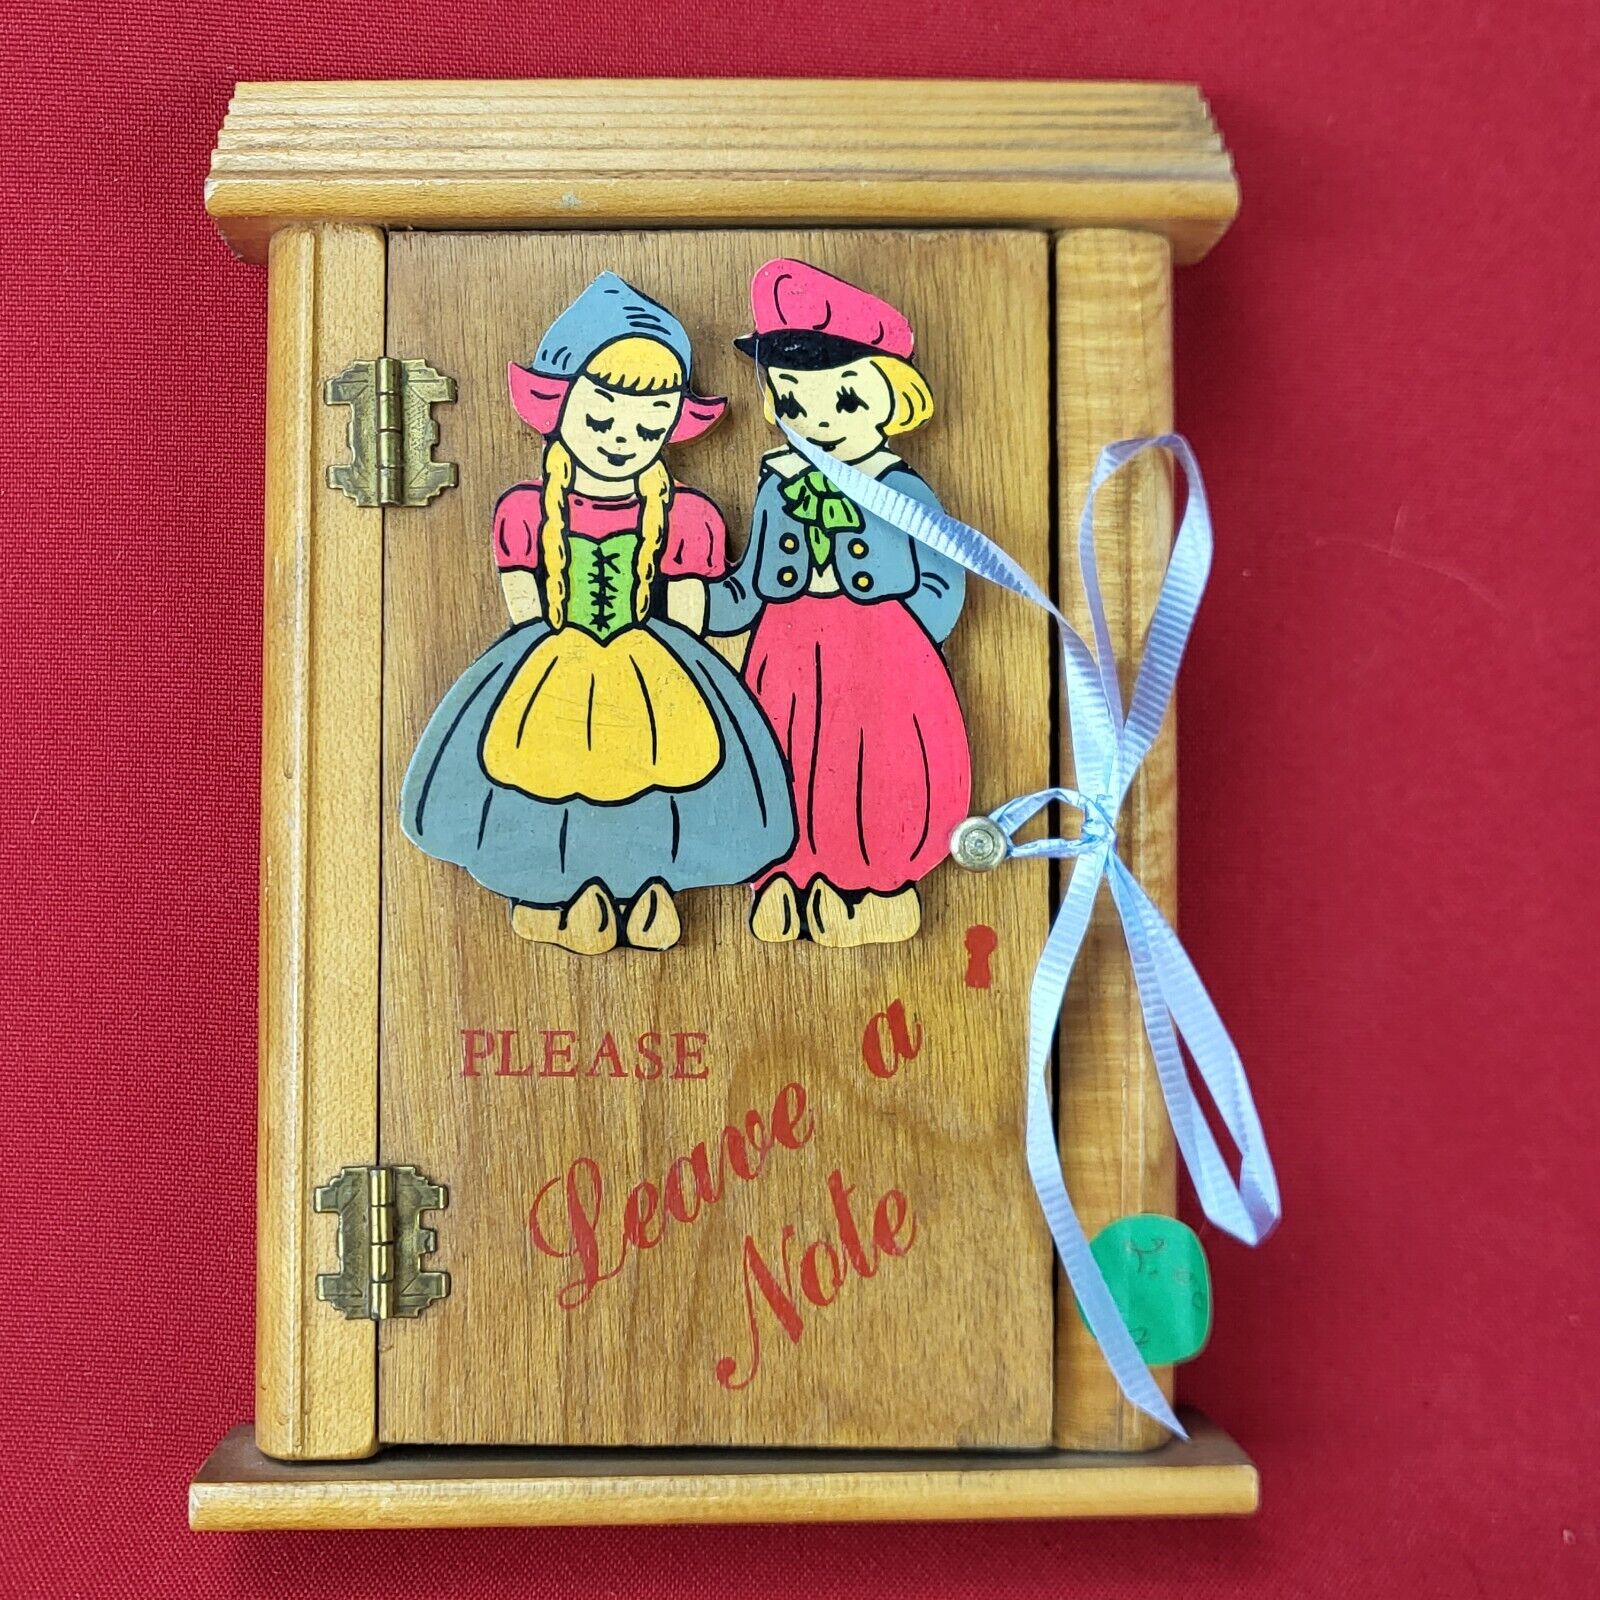 Vintage 1950's /60's Please Leave a Note Wooden Note hanging Box w/Dutch Figures